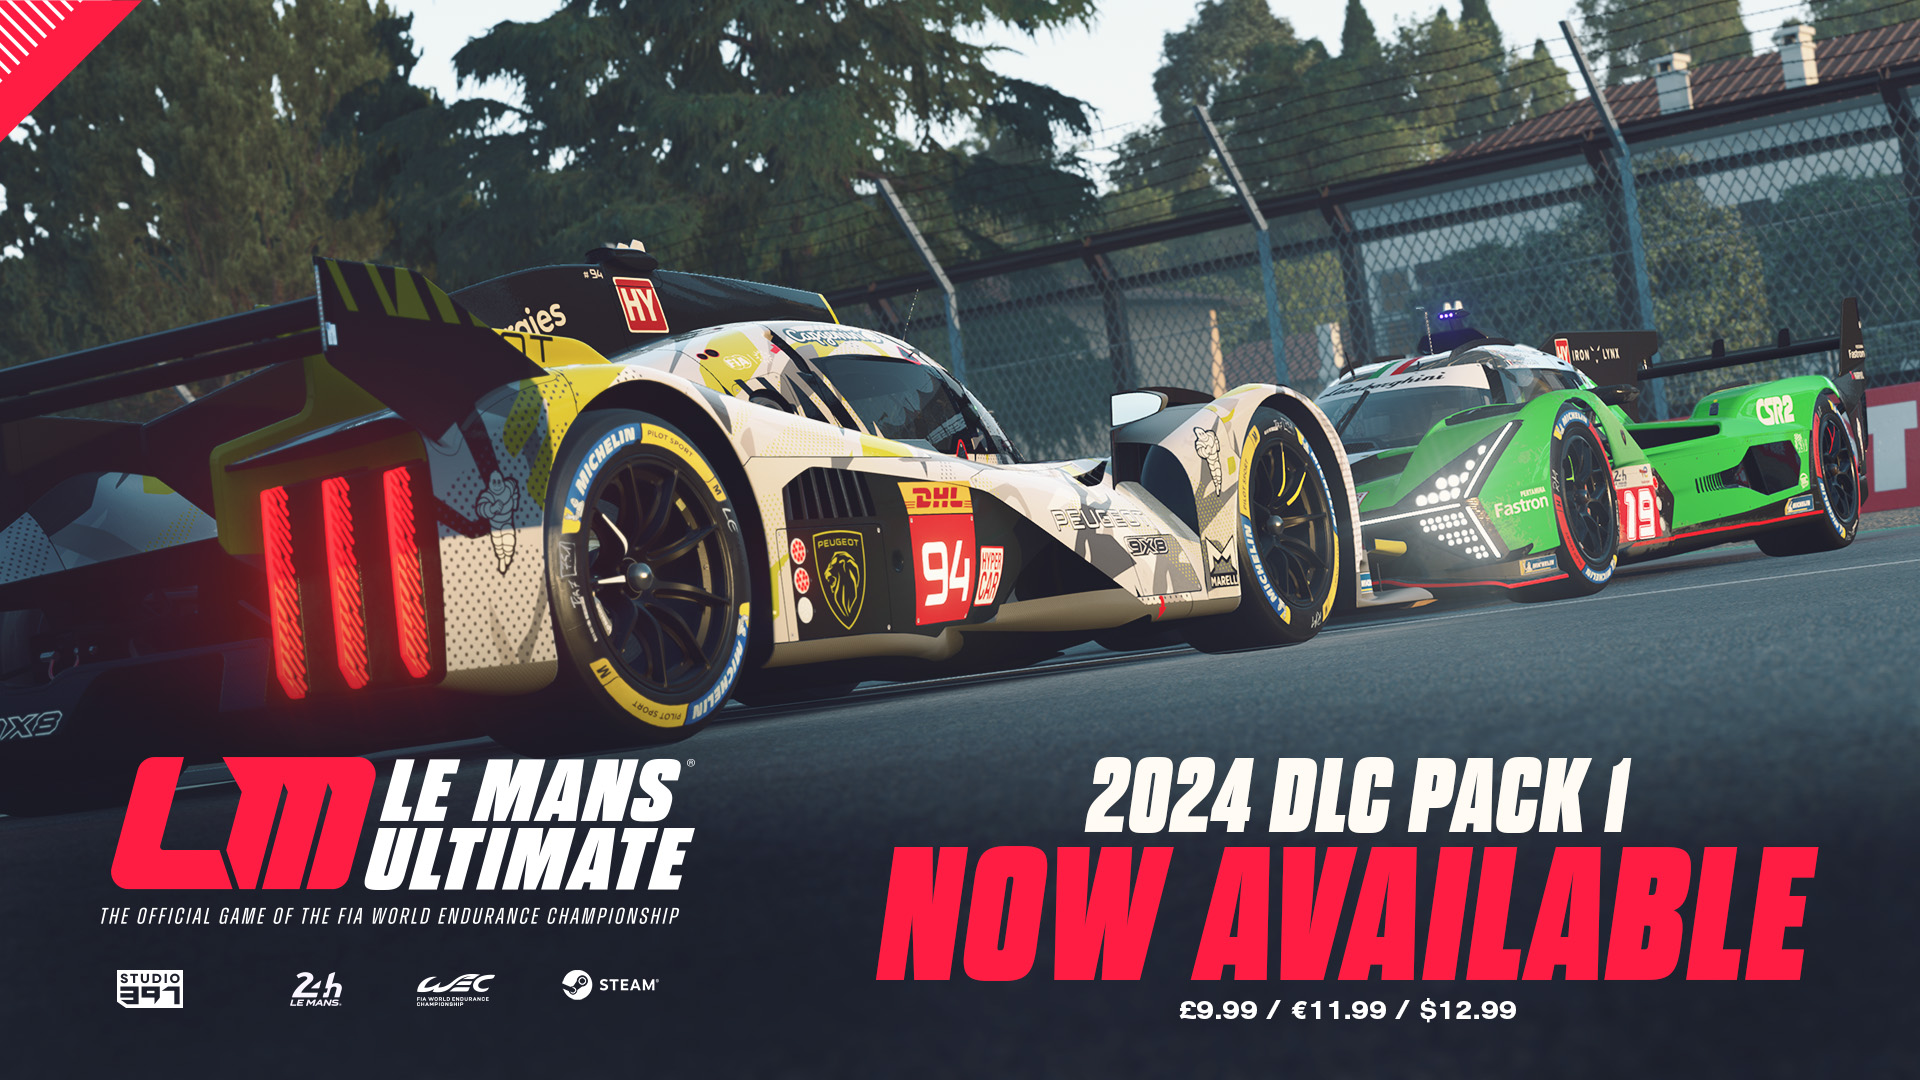 Le Mans Ultimate releases first DLC including Imola Circuit, Lamborghini SC63 and Peugeot 9X8 2024 